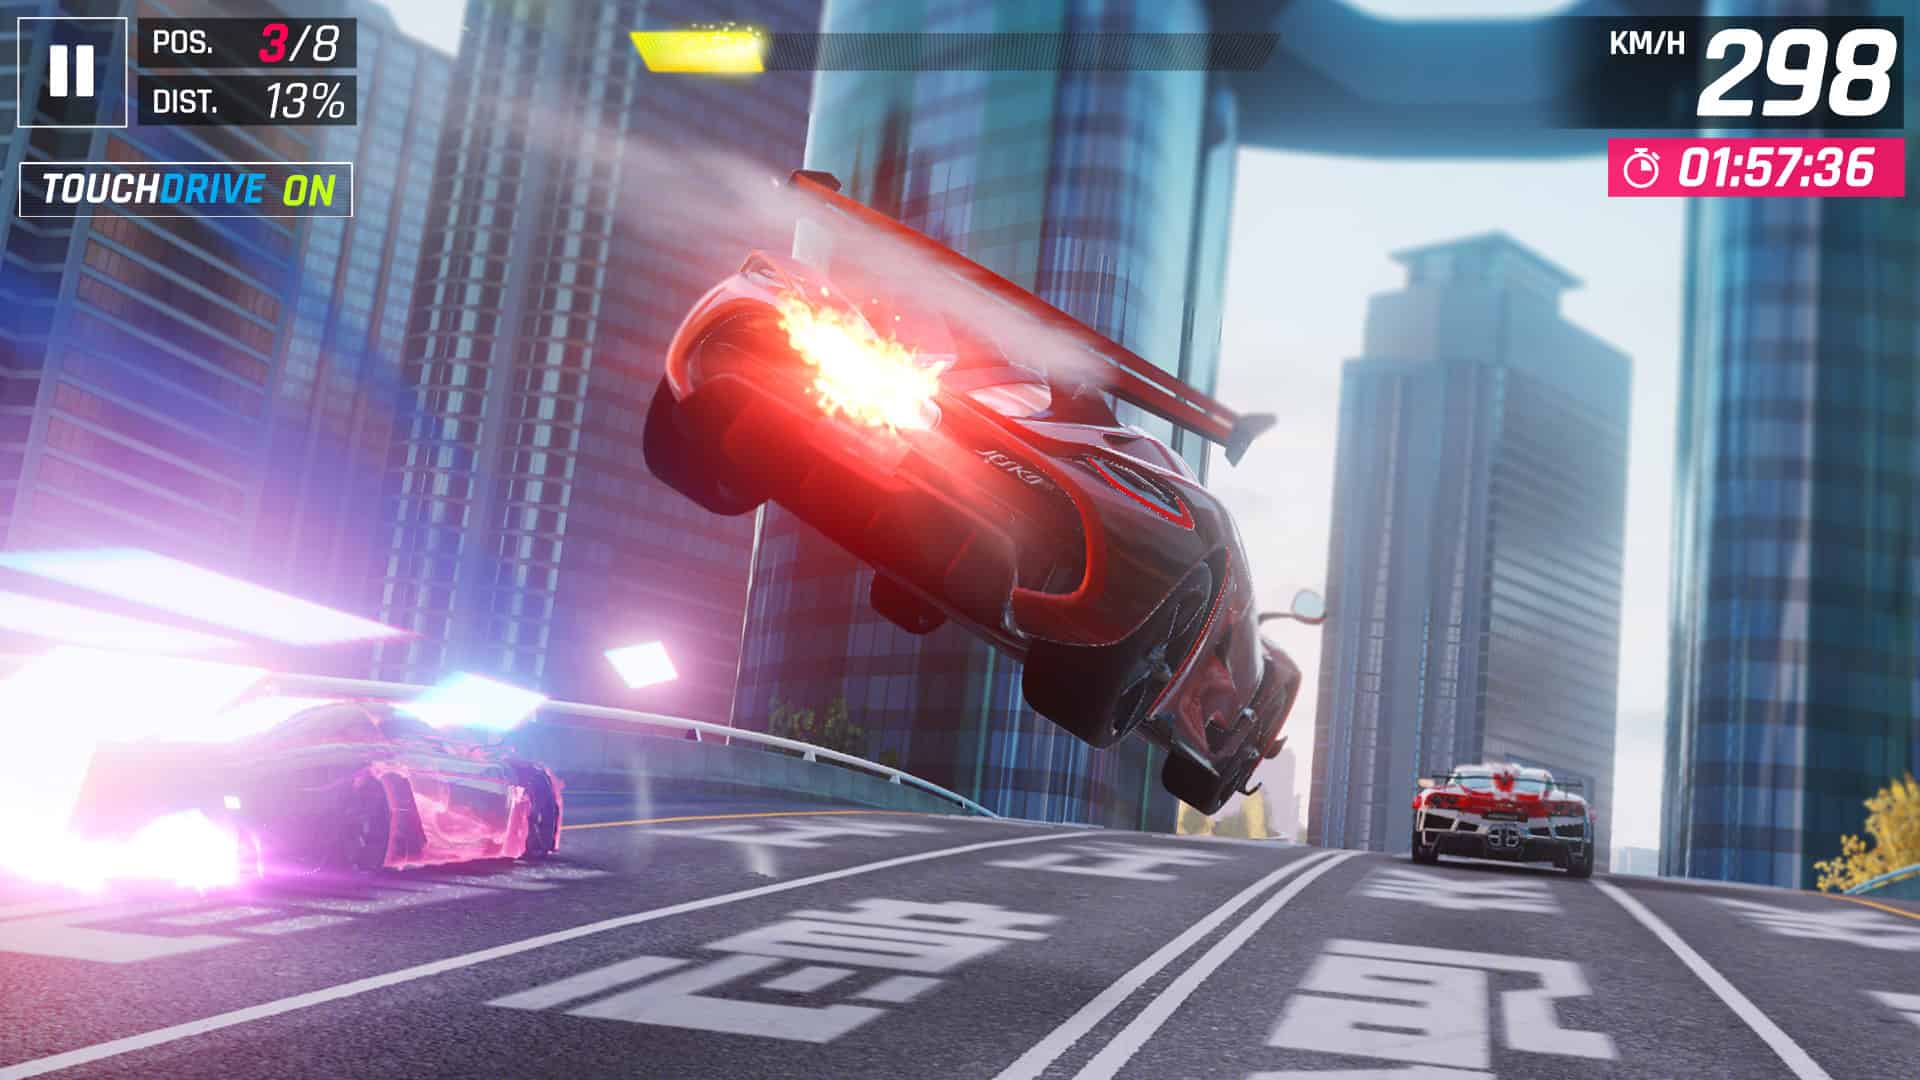 Free-to-play racing game Asphalt 9 - Legends coming to PC this year